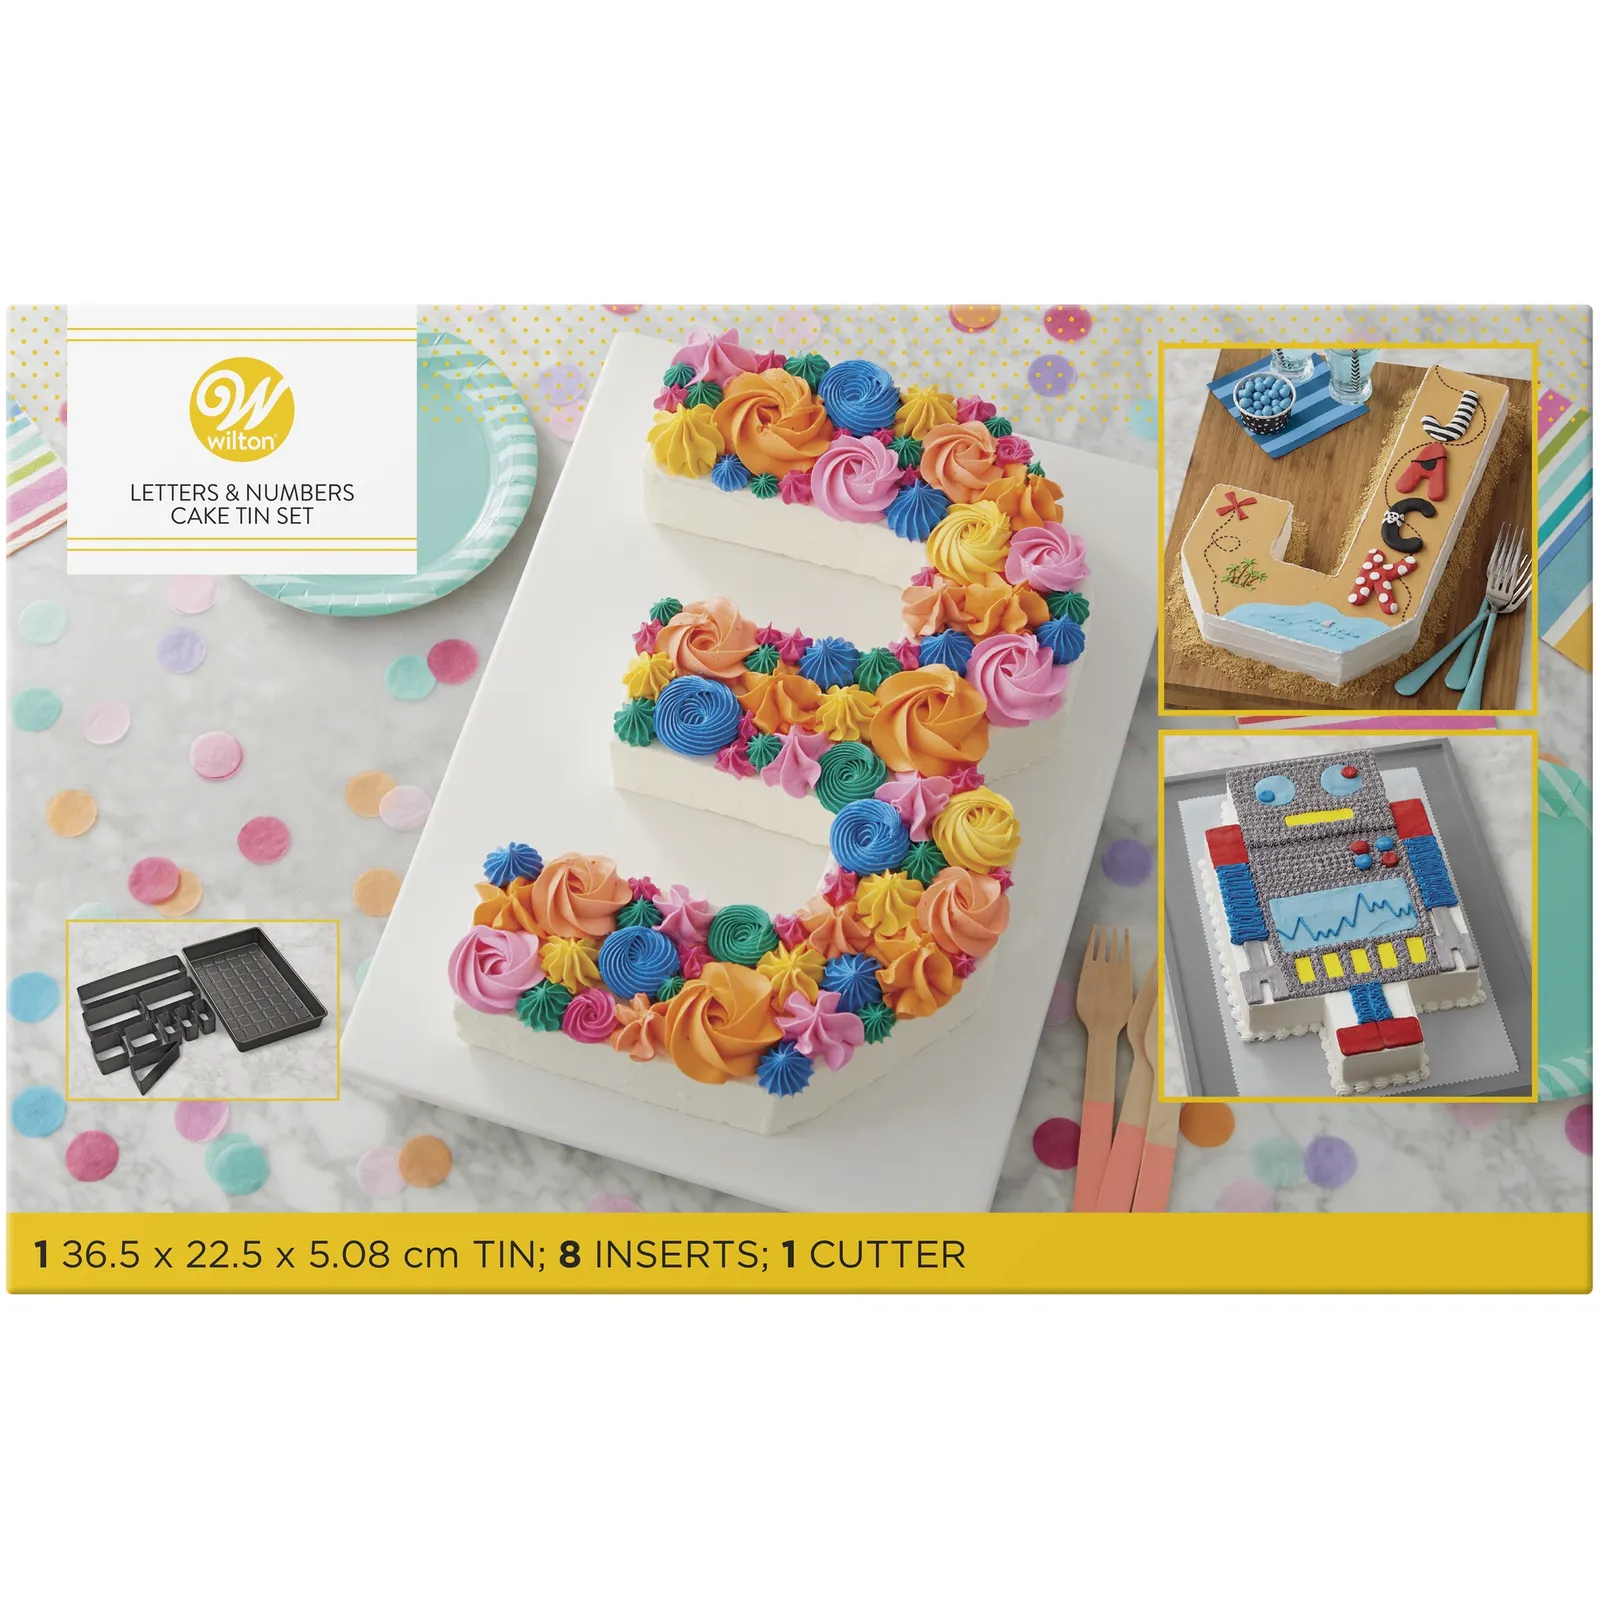 Wilton Baking Mould Letters and Numbers